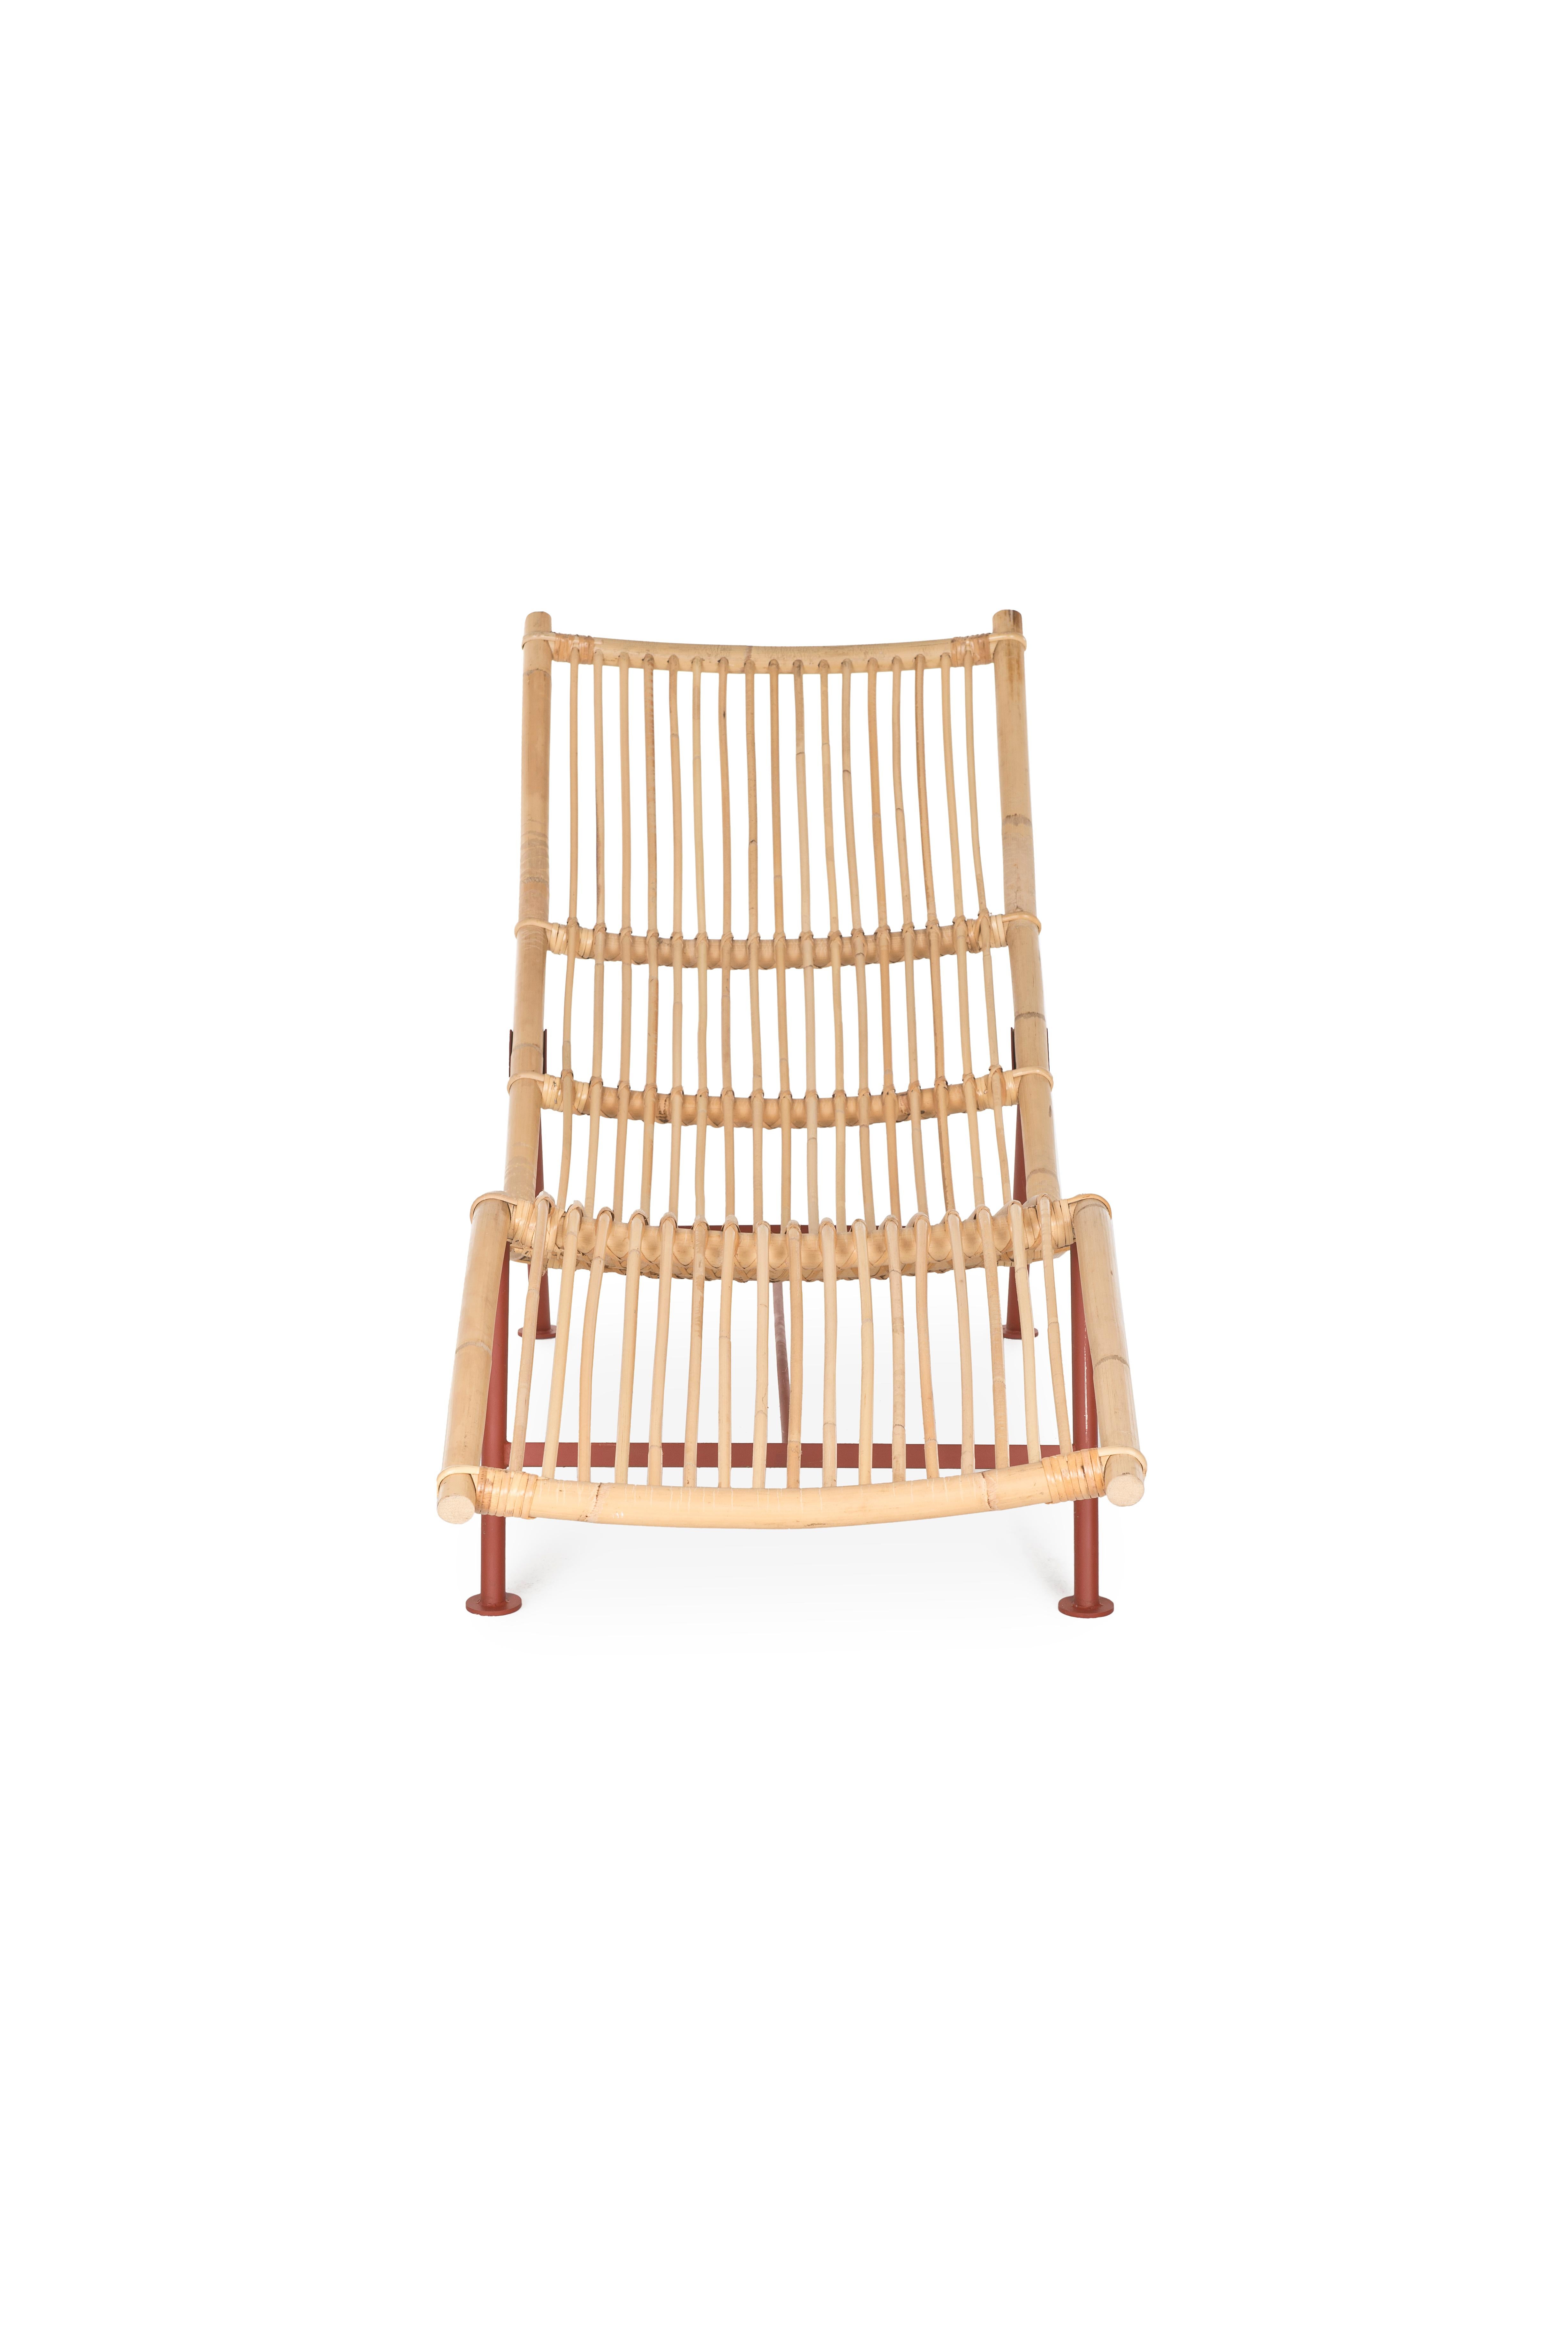 This is the Lensvelt Cane Divan, a rattan Classic designed by the Finnish designer Simo Heikkilä. Made of bamboo with a steel frame in pastel green or brick red. Can only be used inside, not outside.

   